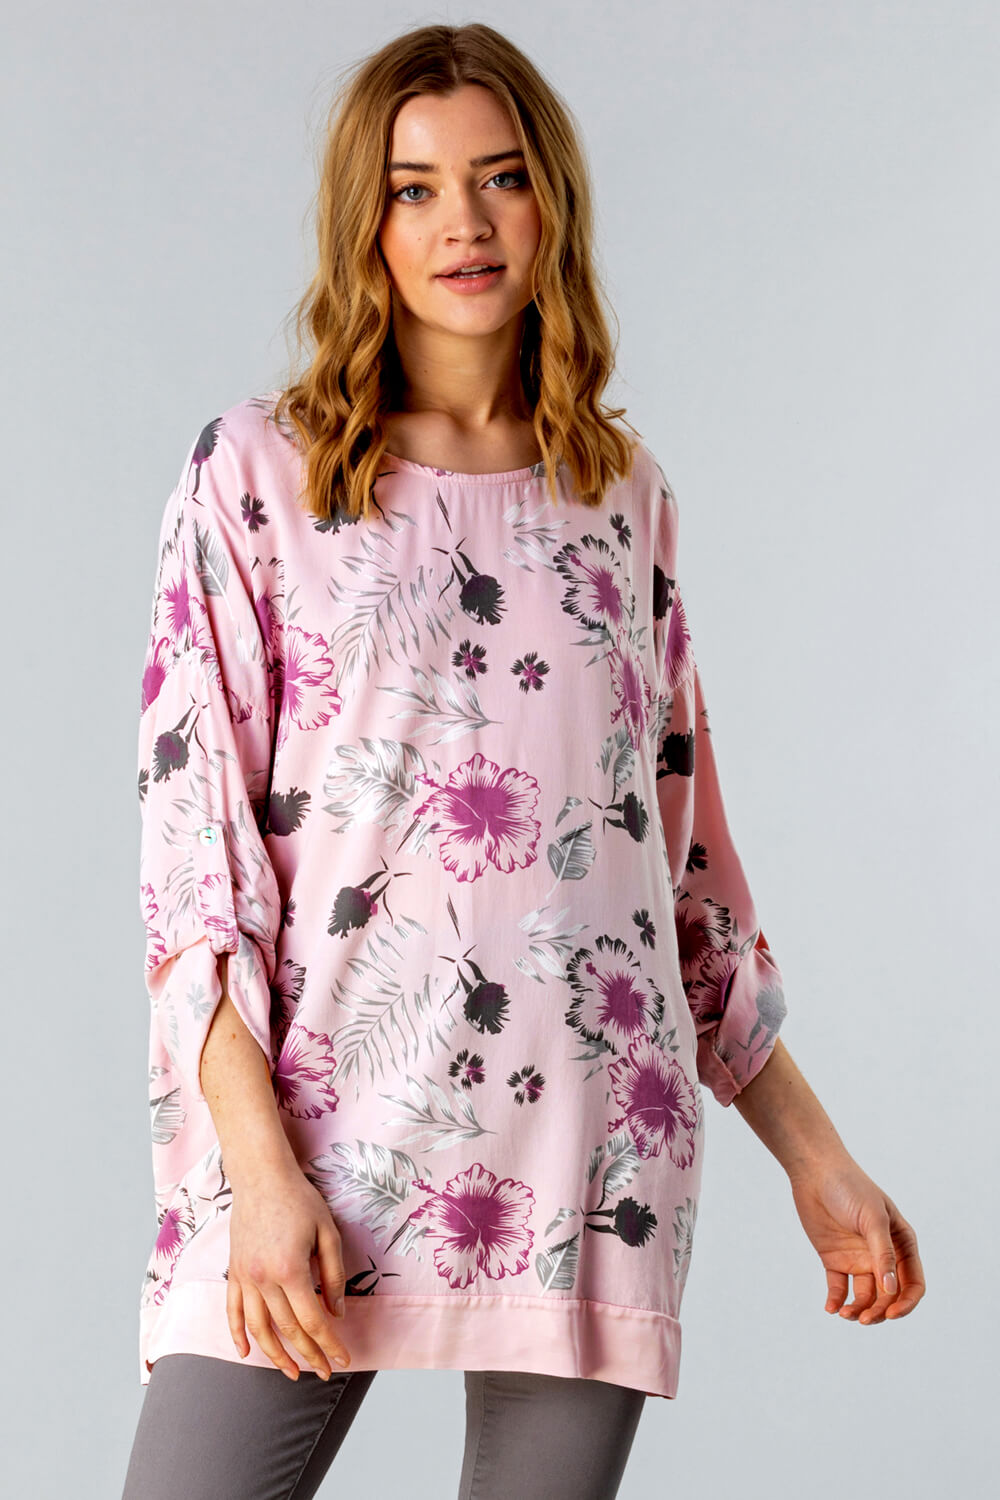 Floral Print Longline Tunic Top in PINK ...